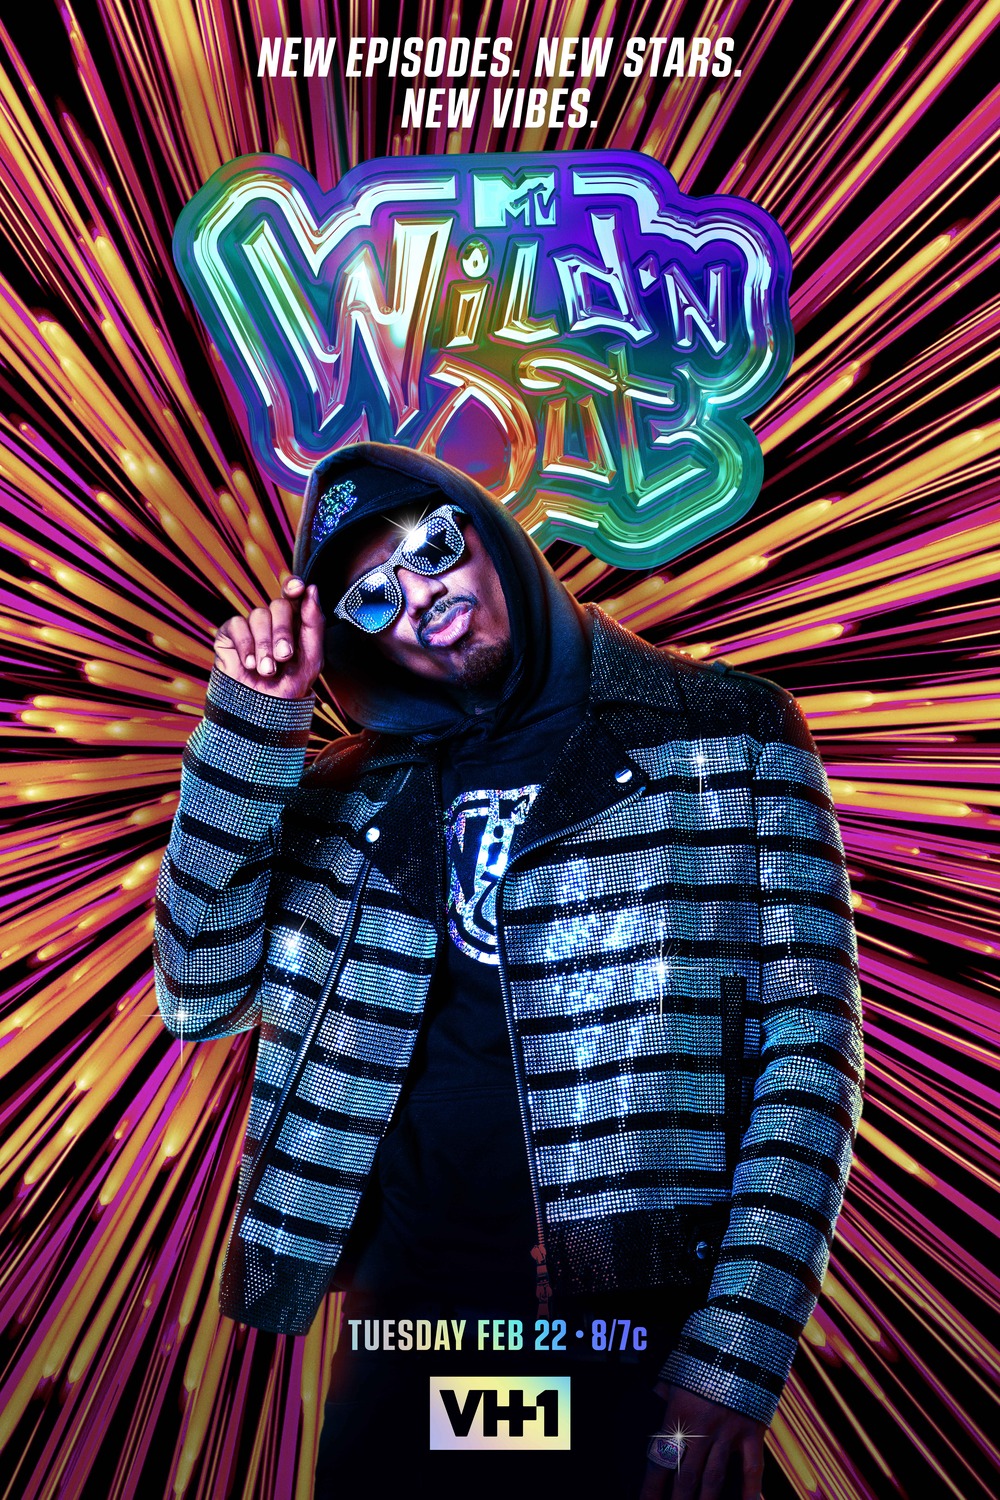 Extra Large TV Poster Image for Wild 'N Out (#2 of 4)